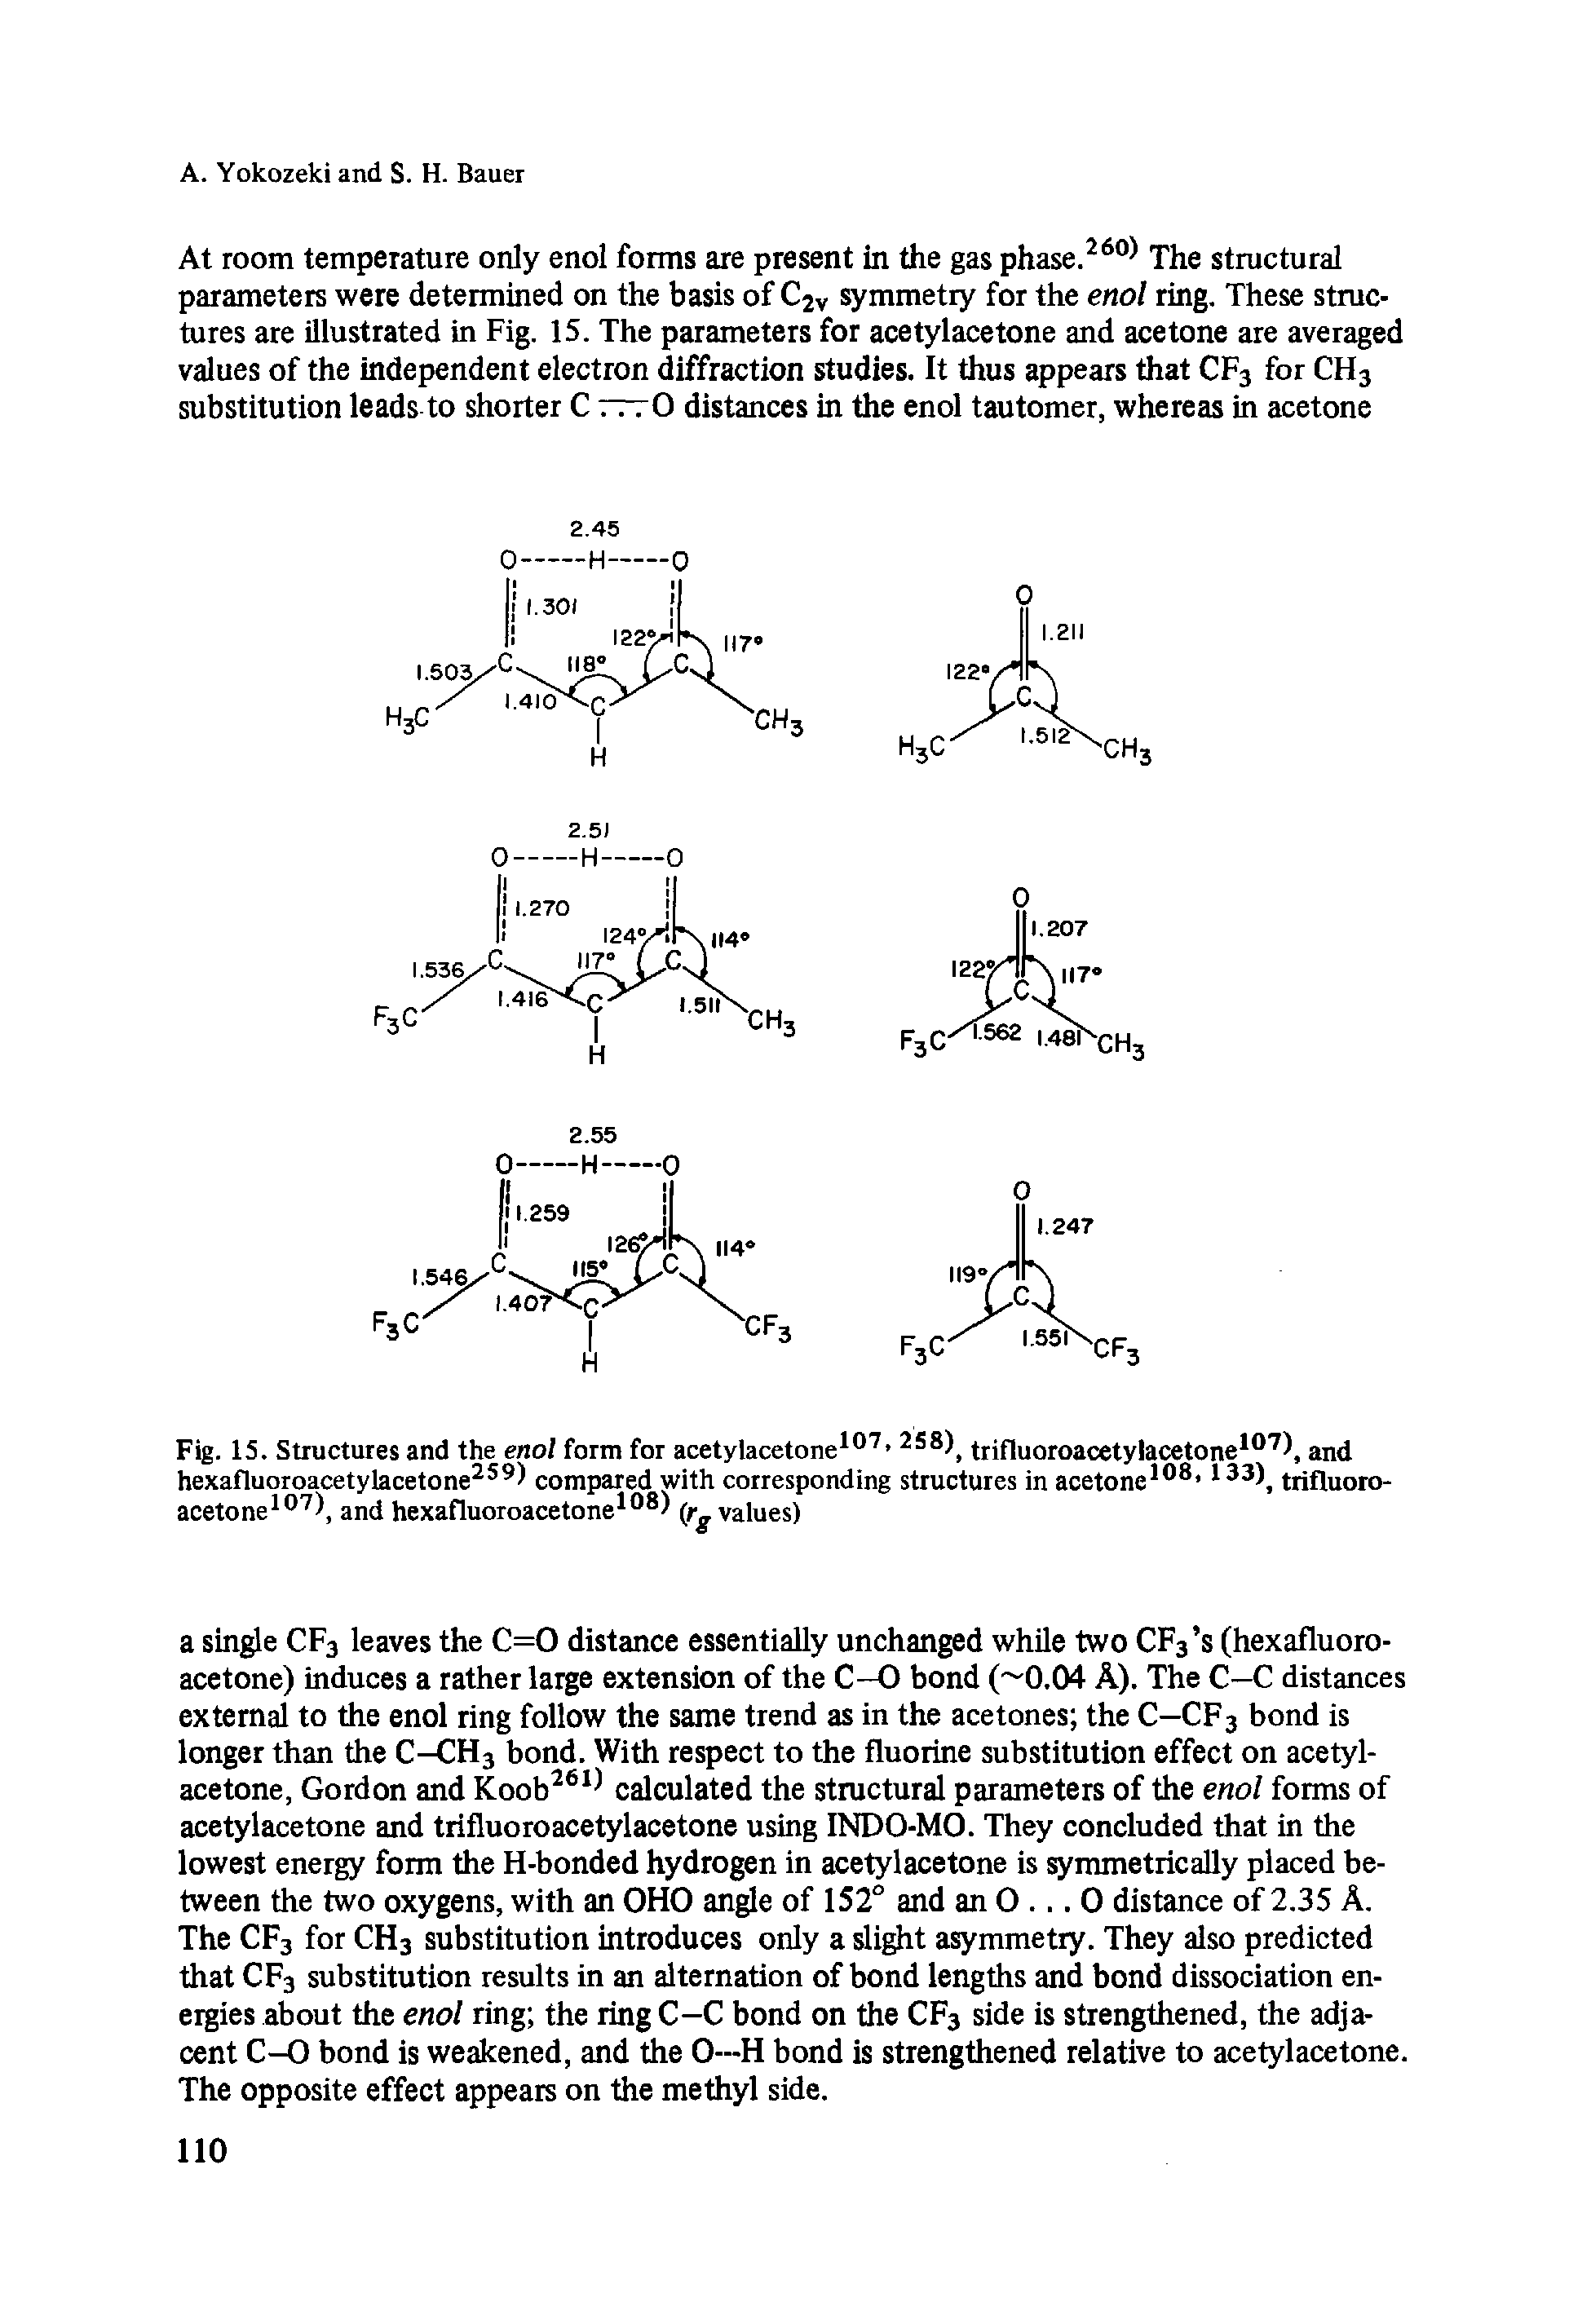 Fig. 15. Structures and the enol form for acetylacetone 2 8) trifluoroacetylacetone , and hexafluoroacetylacetone ) compared with corresponding structures in acetone 33) trifluoro-acetone ), and hexafluoroacetone (revalues)...